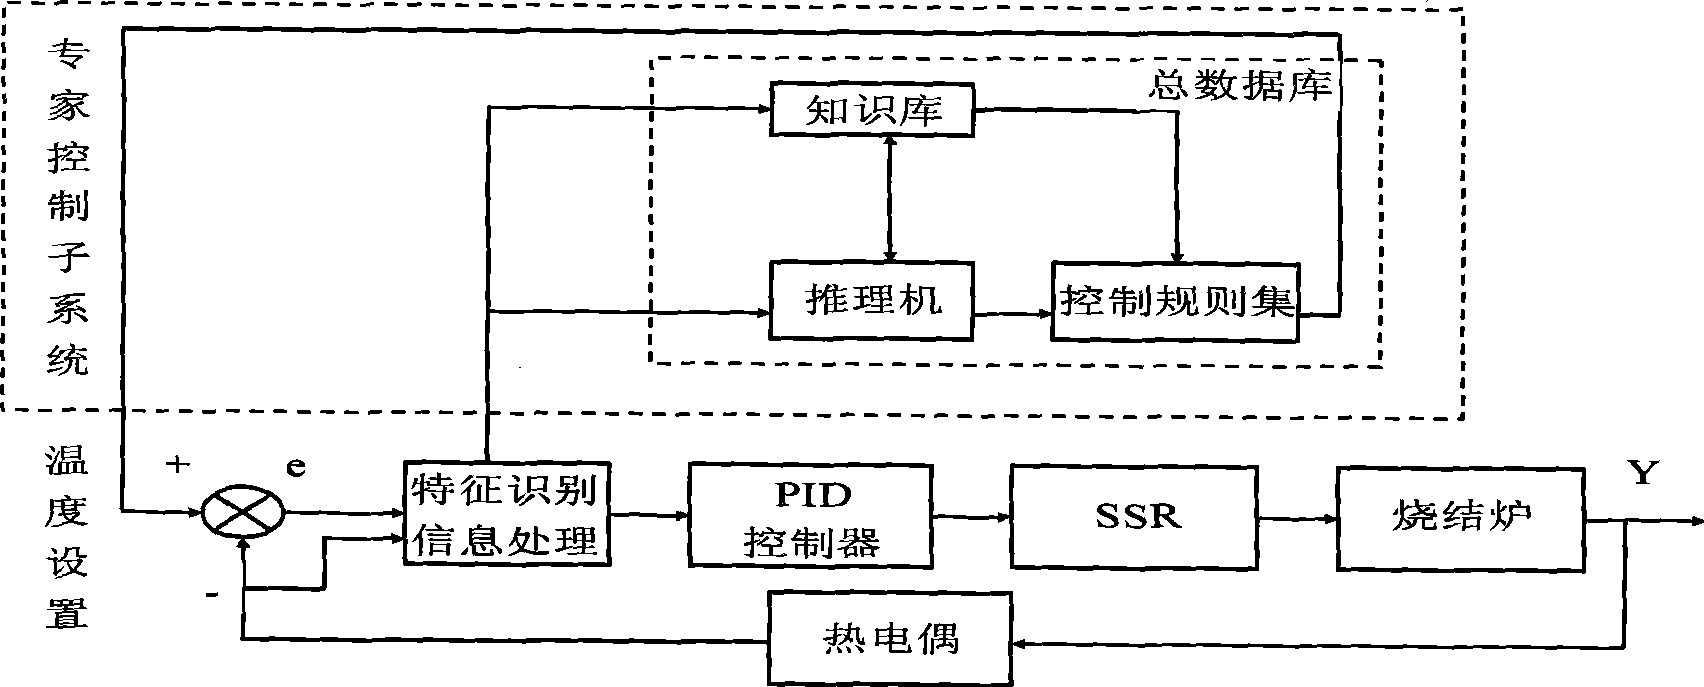 Multi-segment of furnace configuration monitoring system based on temperature field analysis